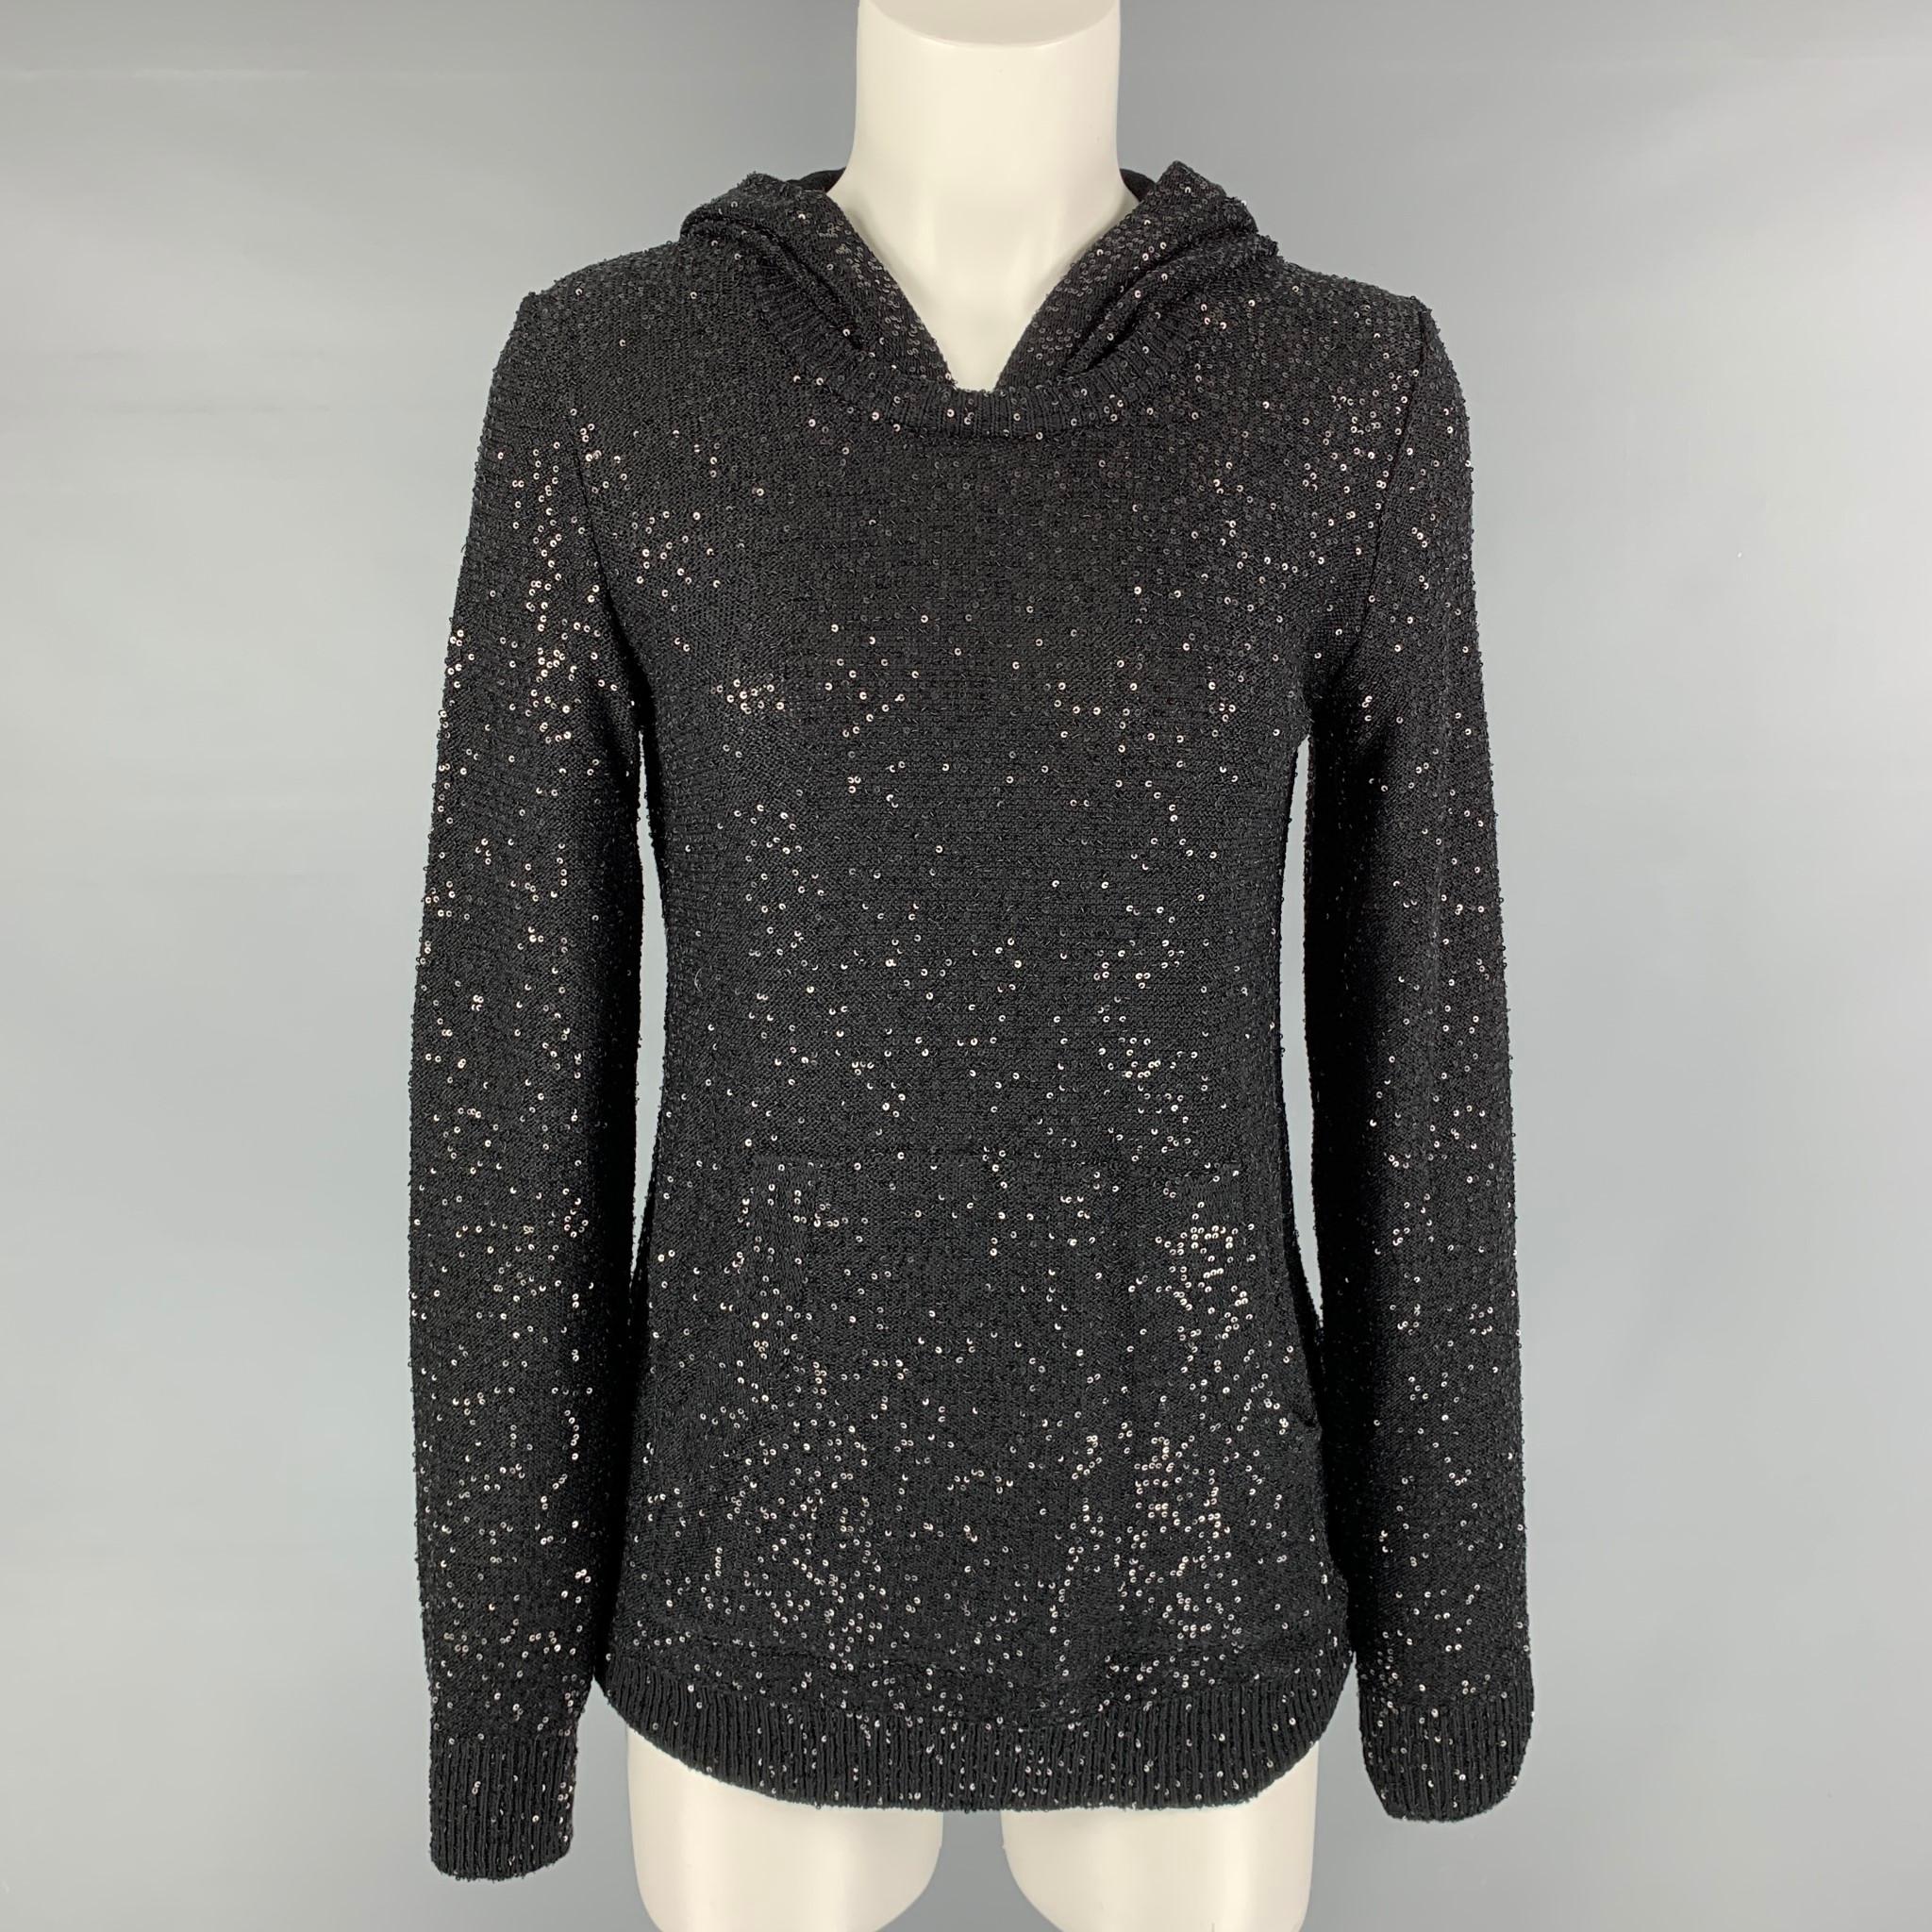 OSCAR DE LA RENTA 'pre fall 2012' hooded pullover comes in black knitted silk and polyester featuring a sequins and frontal pocket. Made in Italy.

Excellent Pre-Owned Condition.
Marked: S

Measurements:

Shoulder: 14.5 in.
Bust: 39 in.
Sleeve: 27